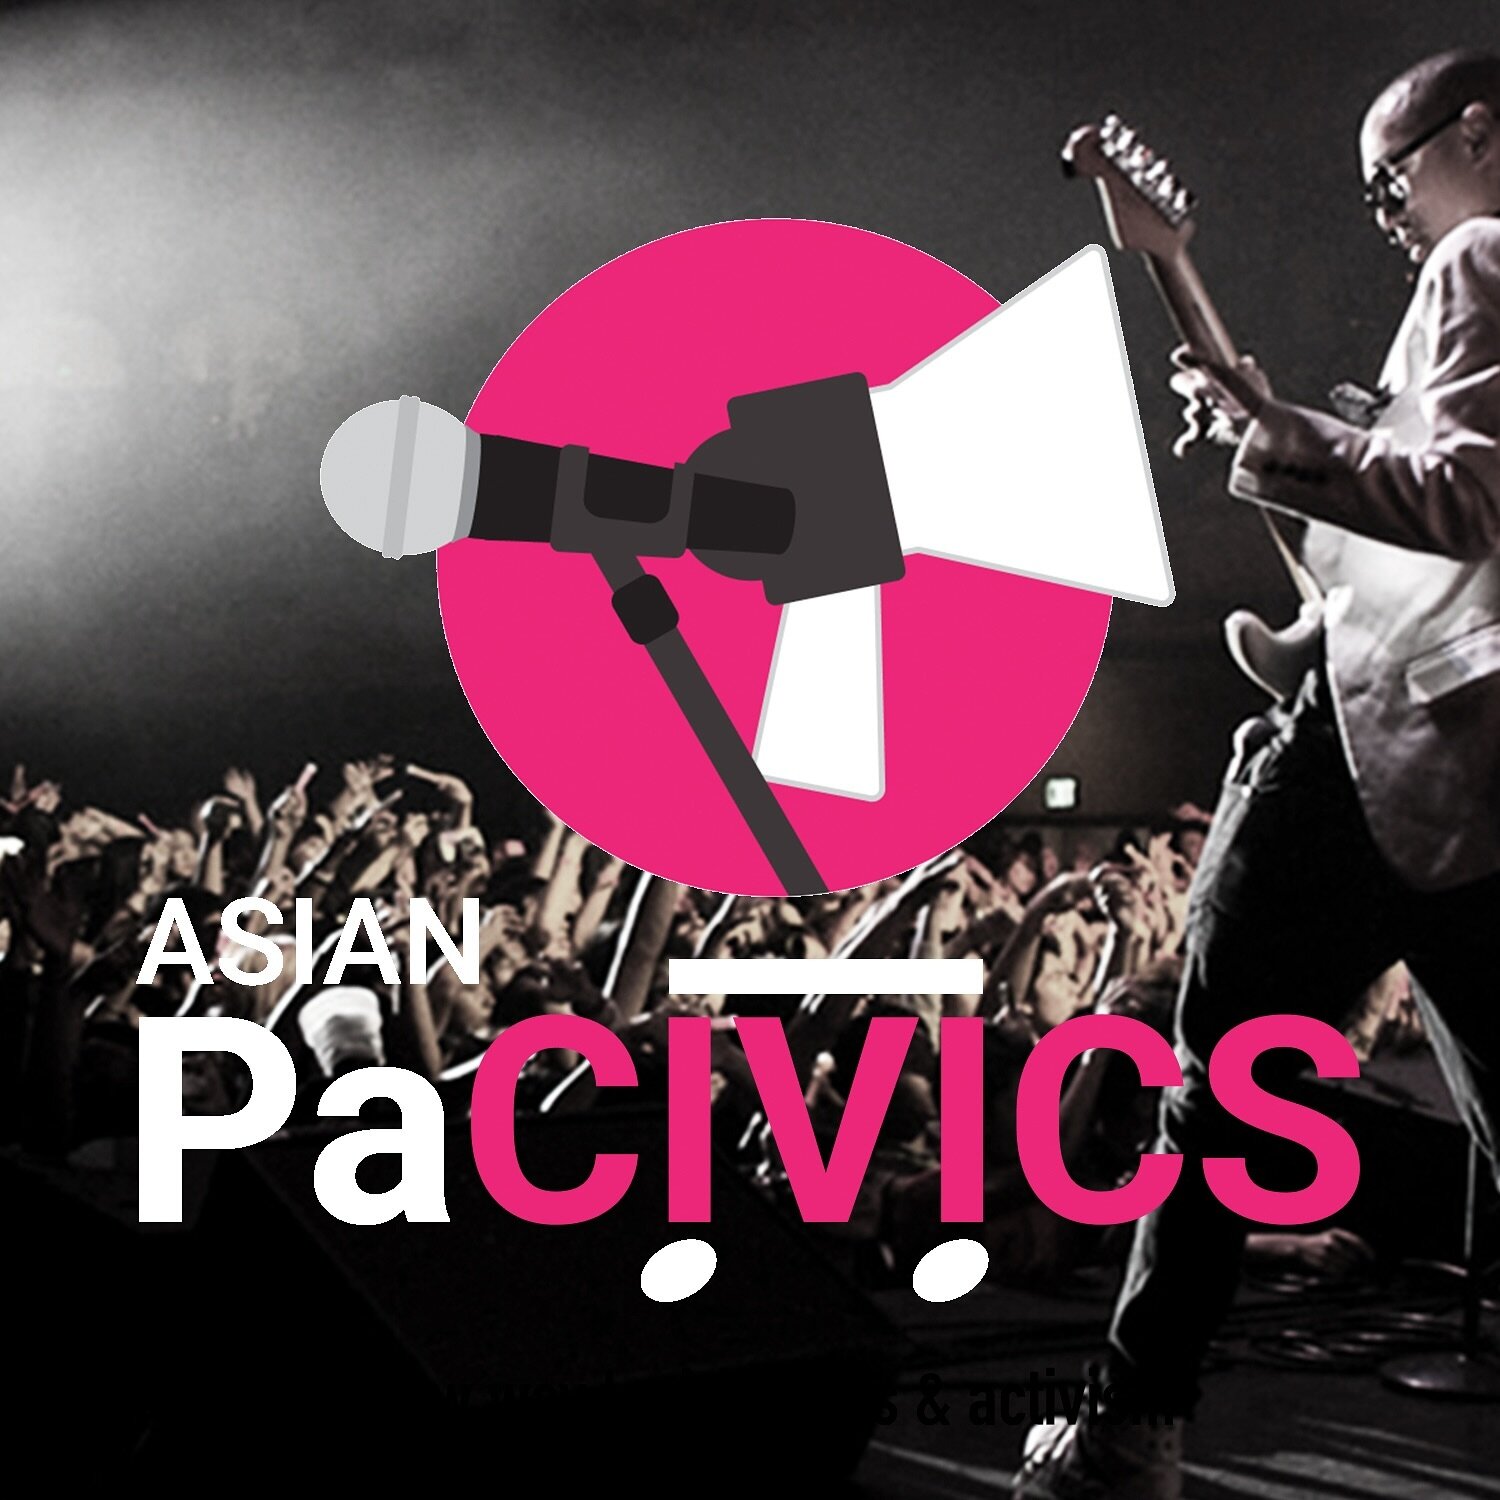 I&rsquo;m being featured in a new television show about Asian American and Pacific Islander artists who are using their music to create social change! This new program, #AsianPaCIVICS, is from @theslantsfound and will be airing this fall. More to com